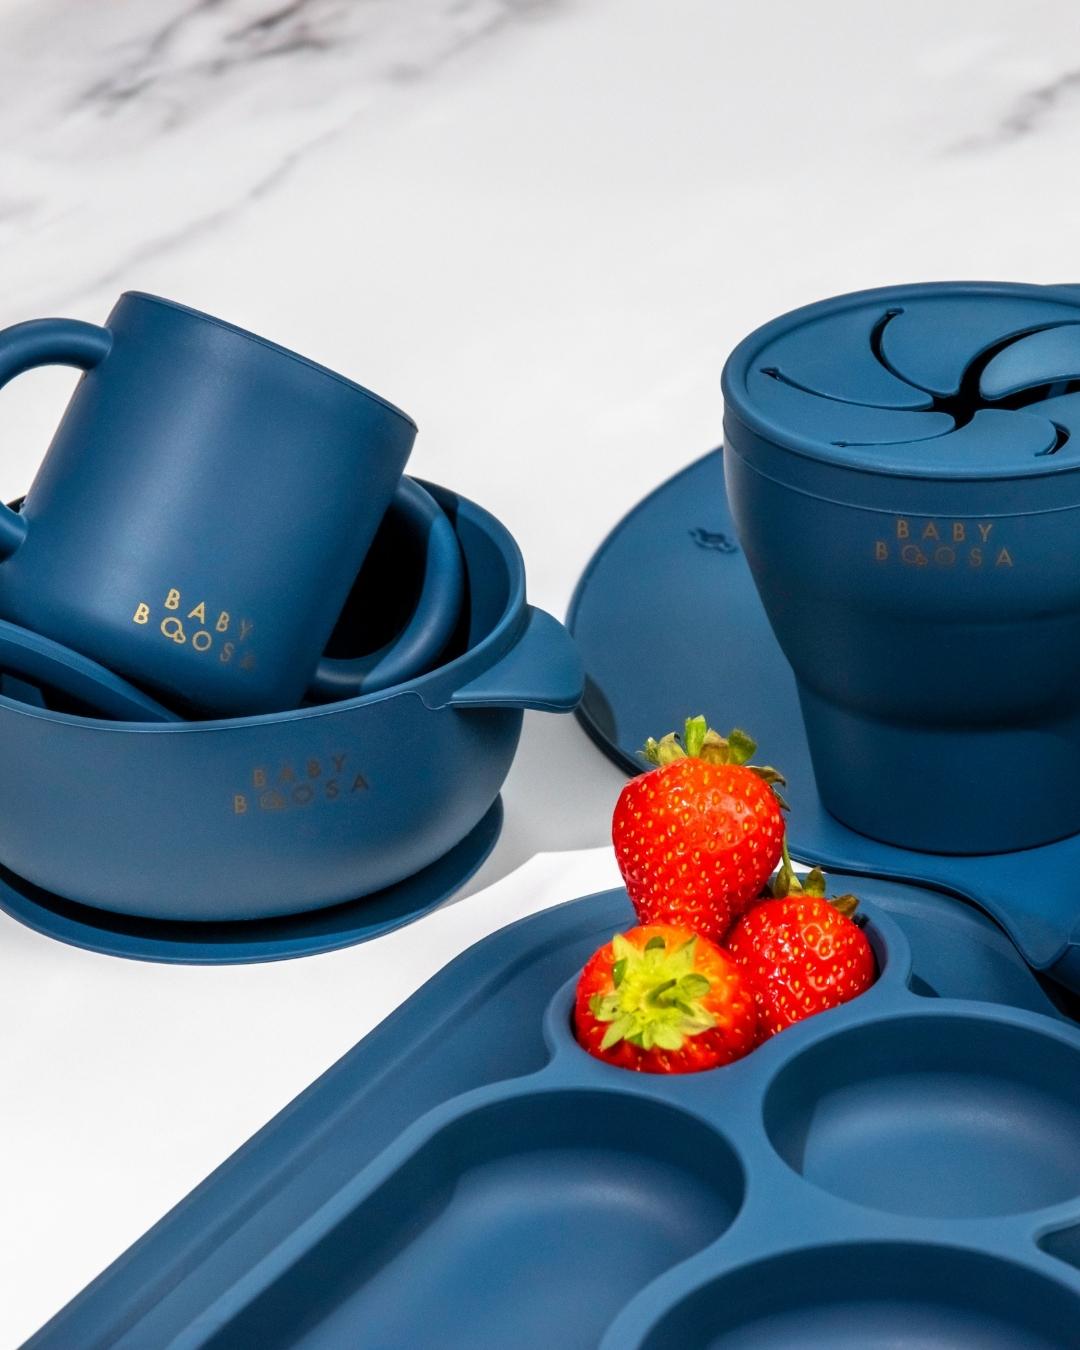 Surprise Snack Pot | Collapsible &amp; Soft | No-Spill | Easy Grip | On-The-Go (Riviera Blue)